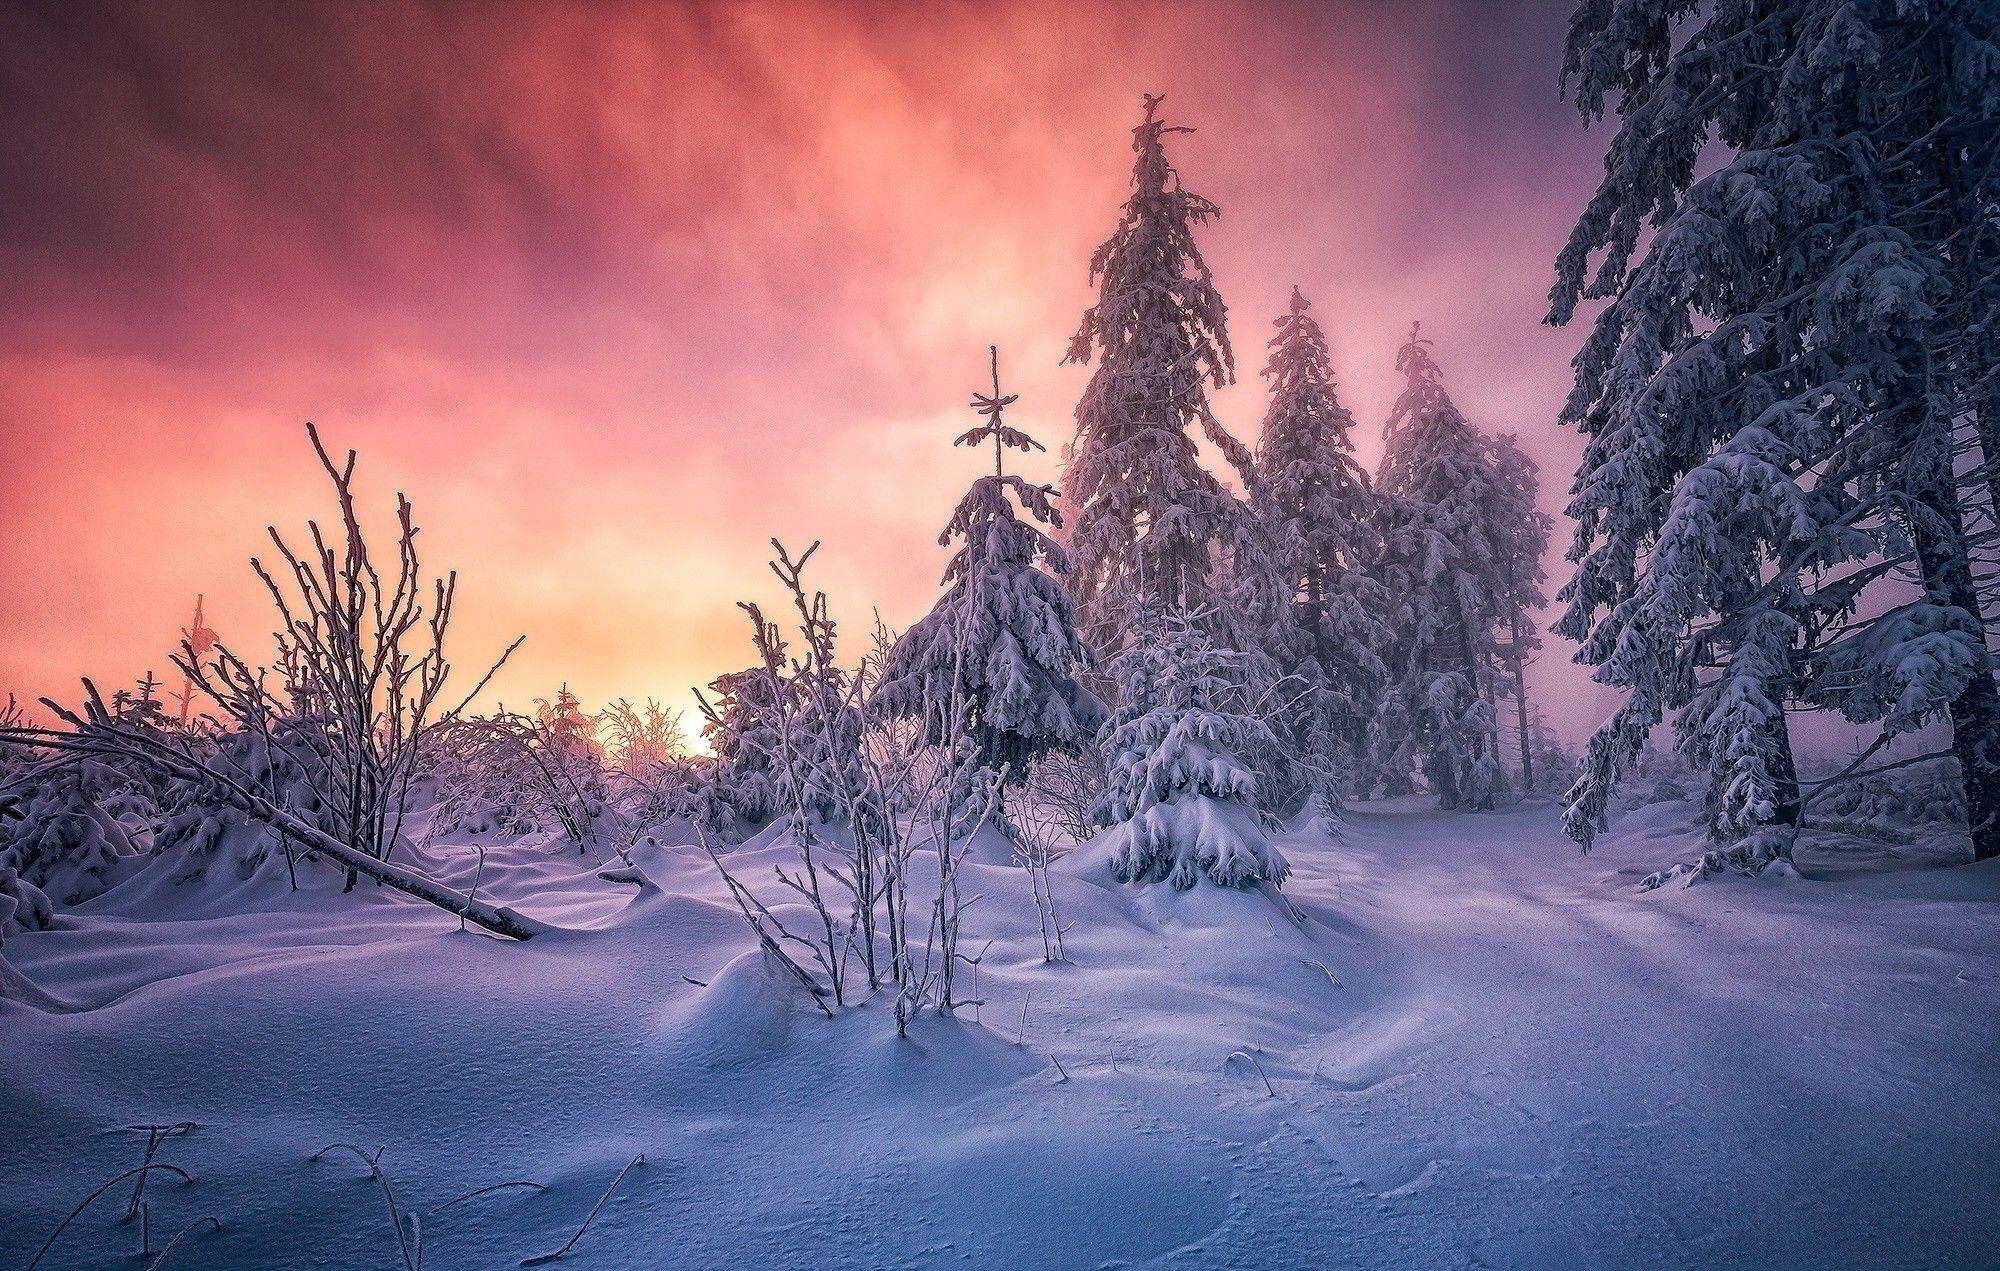 forest, Winter, Sunrise, Germany, Snow, Trees, Cold, Clouds, Path, White, Yellow, Pink, Nature, Lan. Landscape wallpaper, Background image, Download wallpaper hd